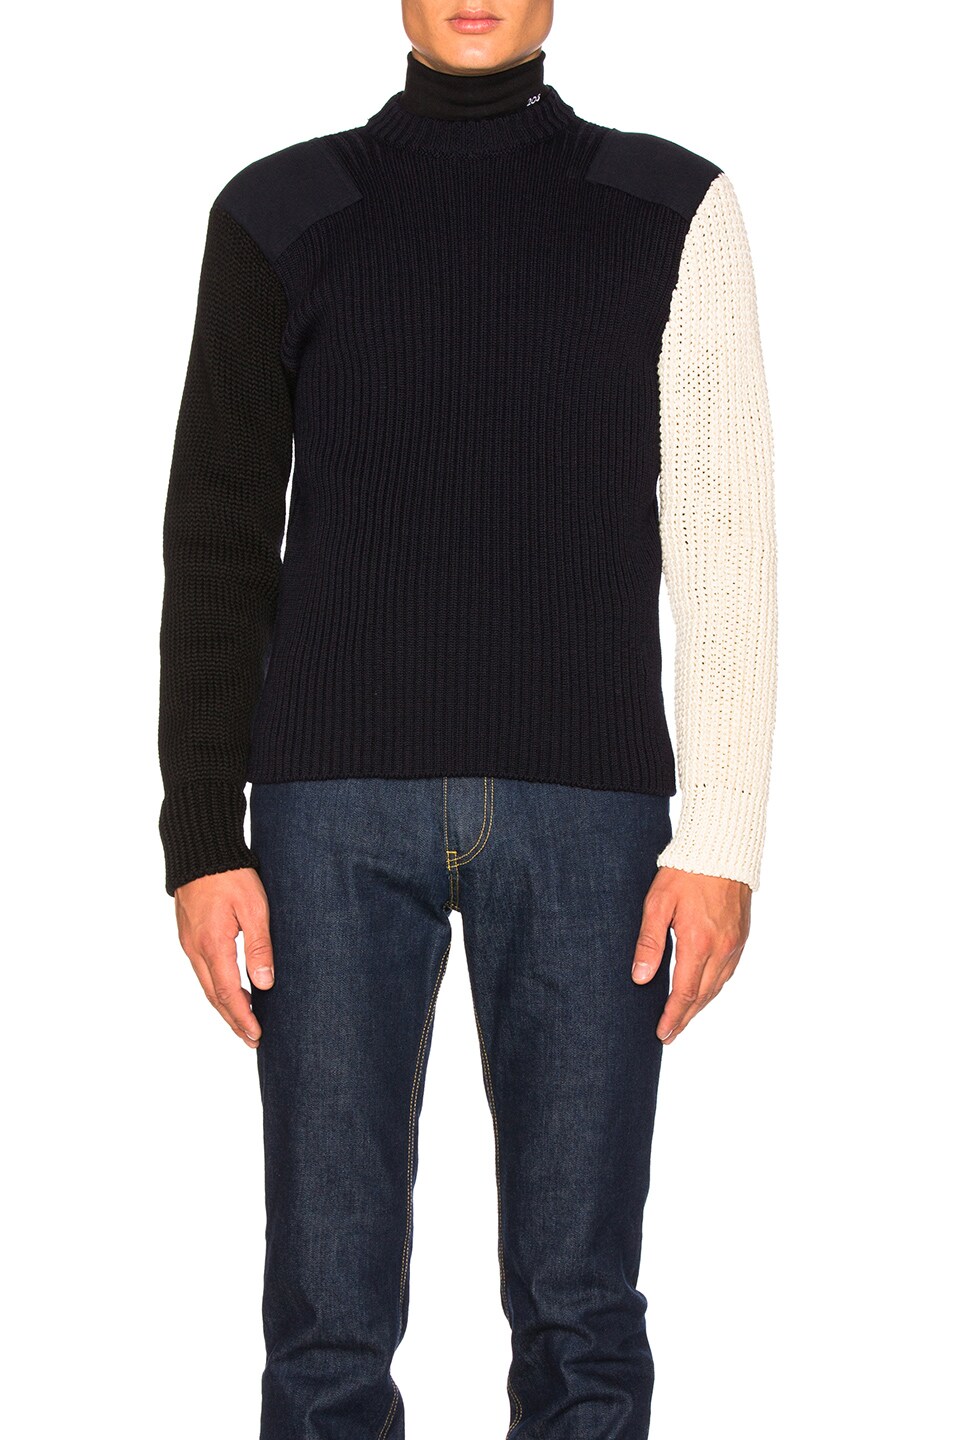 Image 1 of CALVIN KLEIN 205W39NYC Flag Knit Sweater in Black & Navy